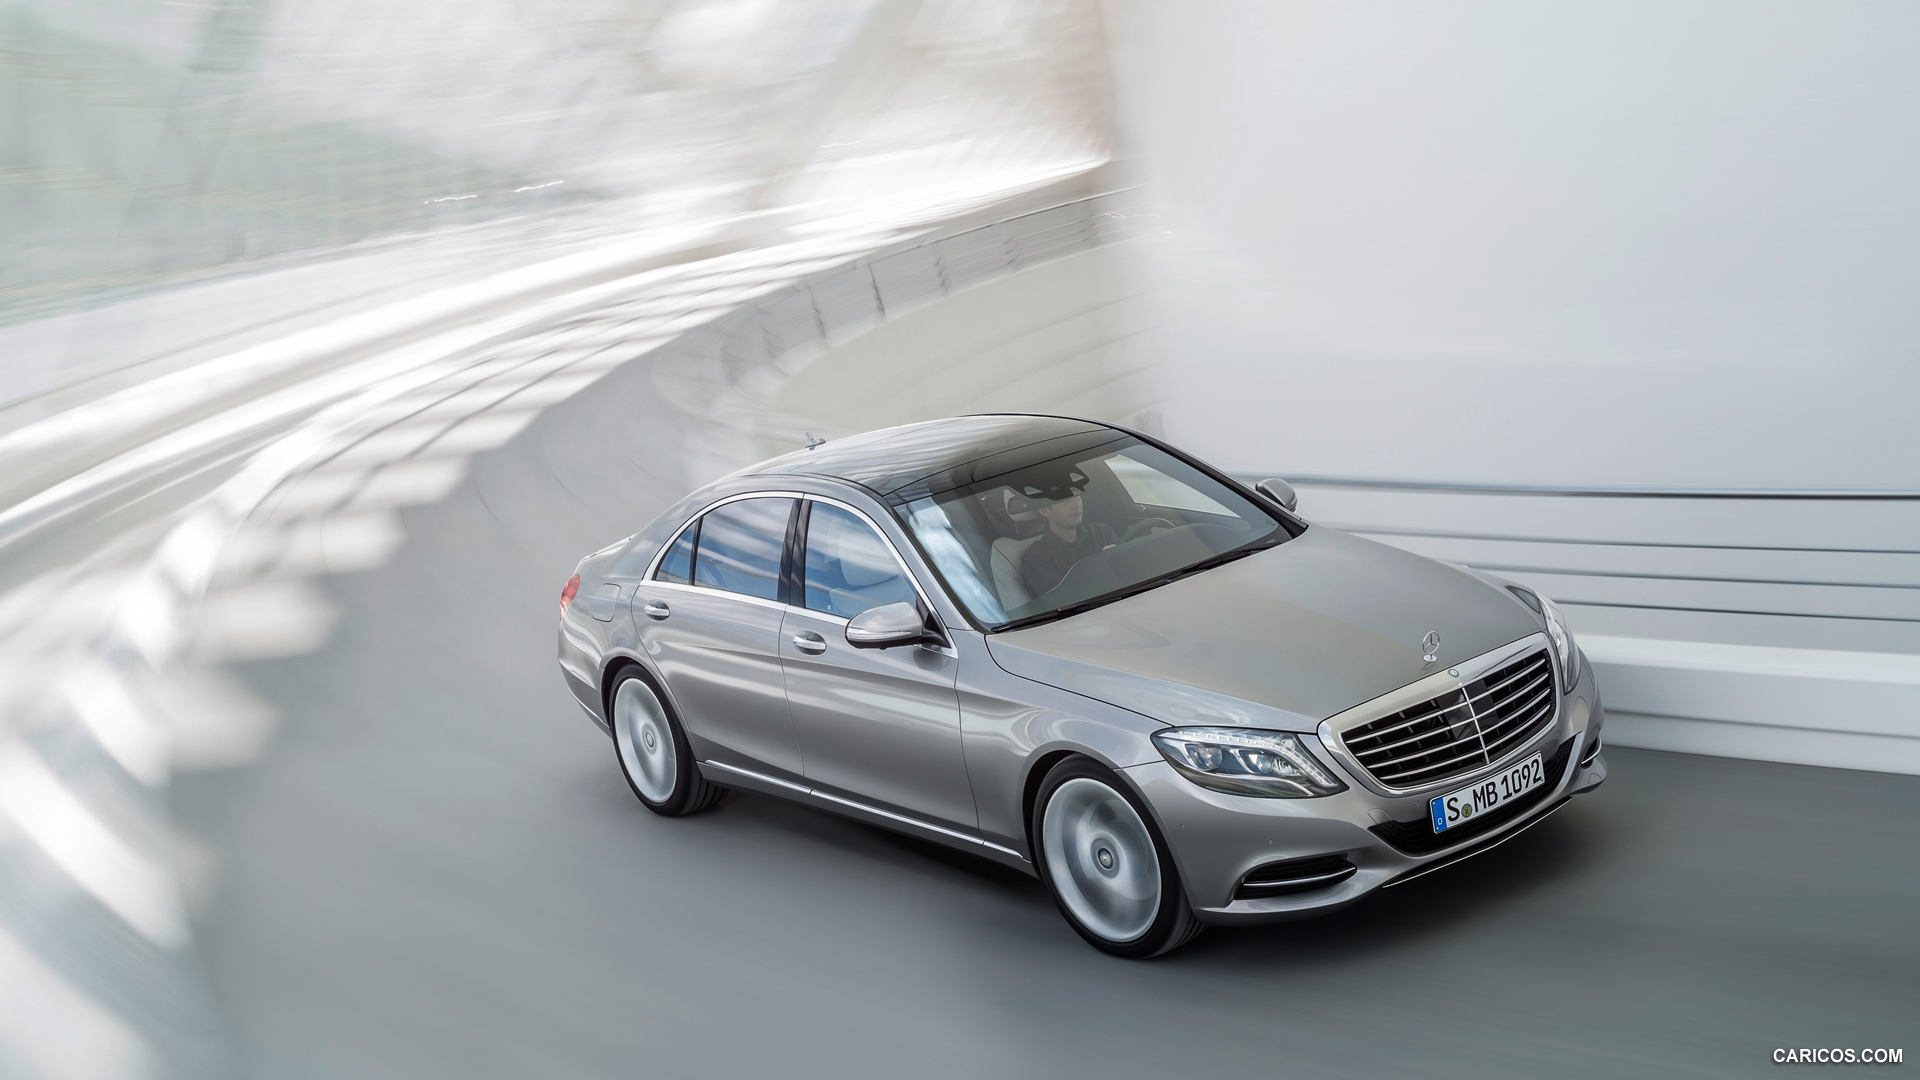 2014 Mercedes-Benz S-Class S400 HYBRID - Front, #3 of 138